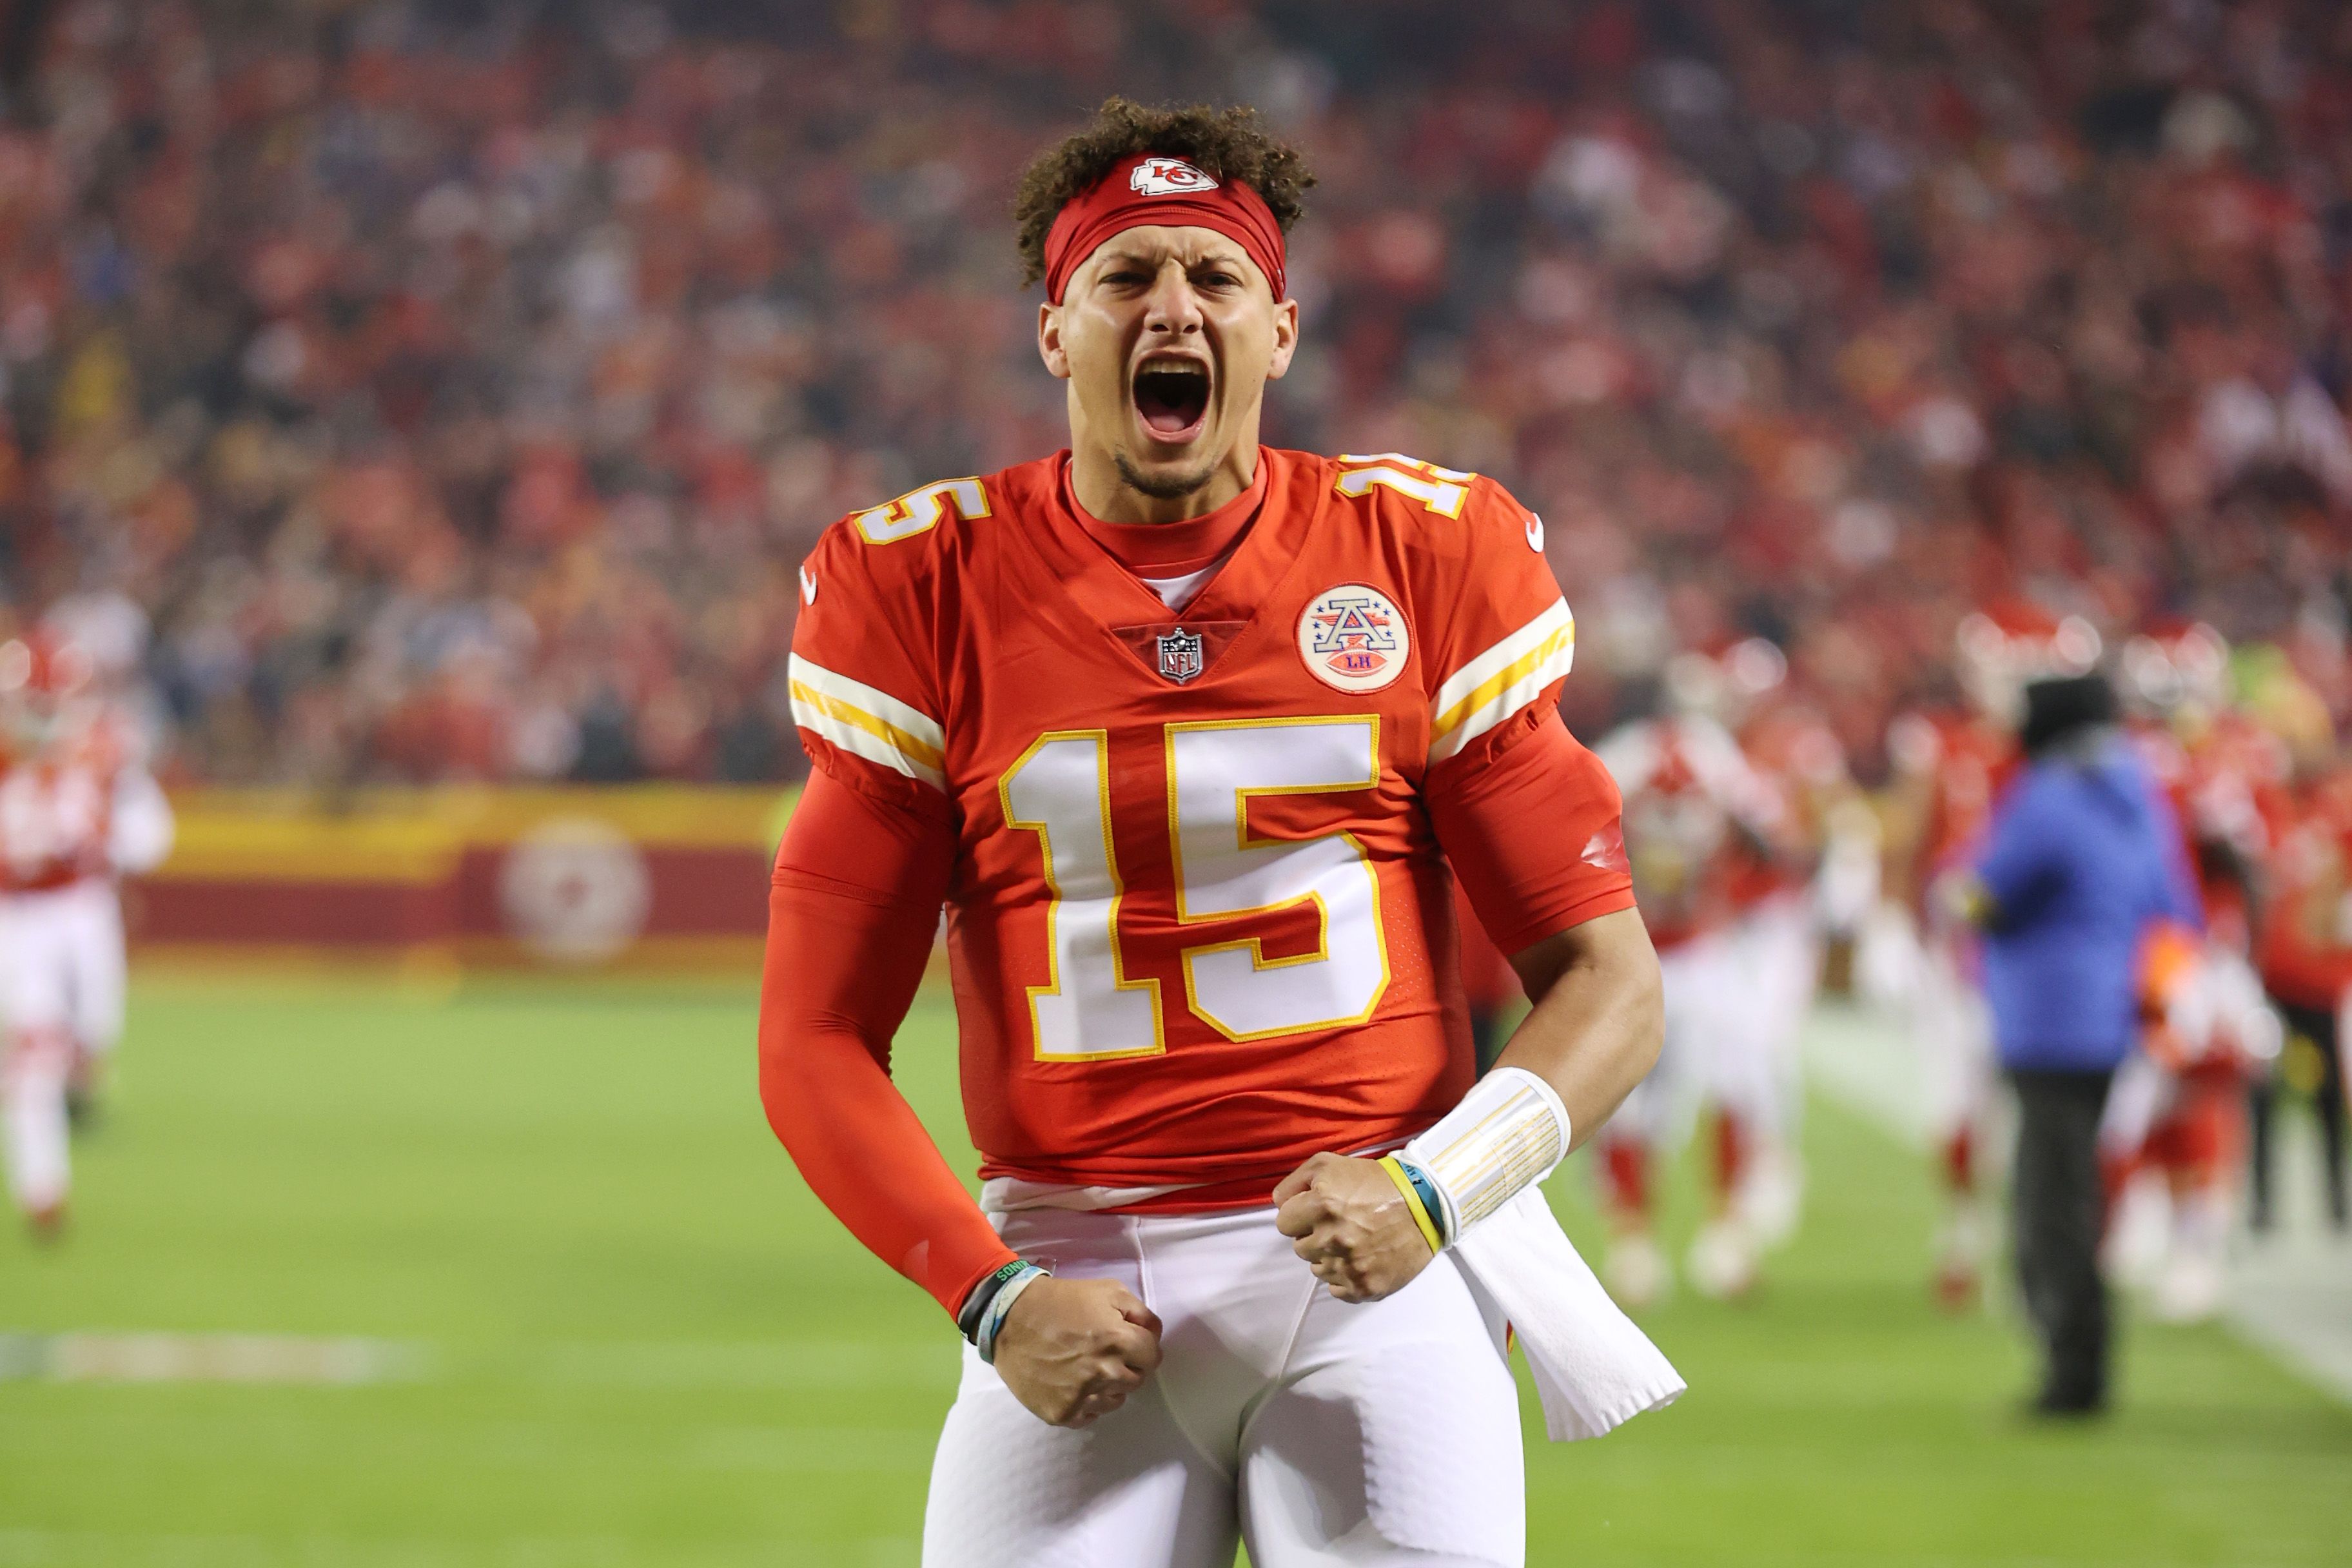 Kansas City Chiefs edge past New York Giants but 'everything's not